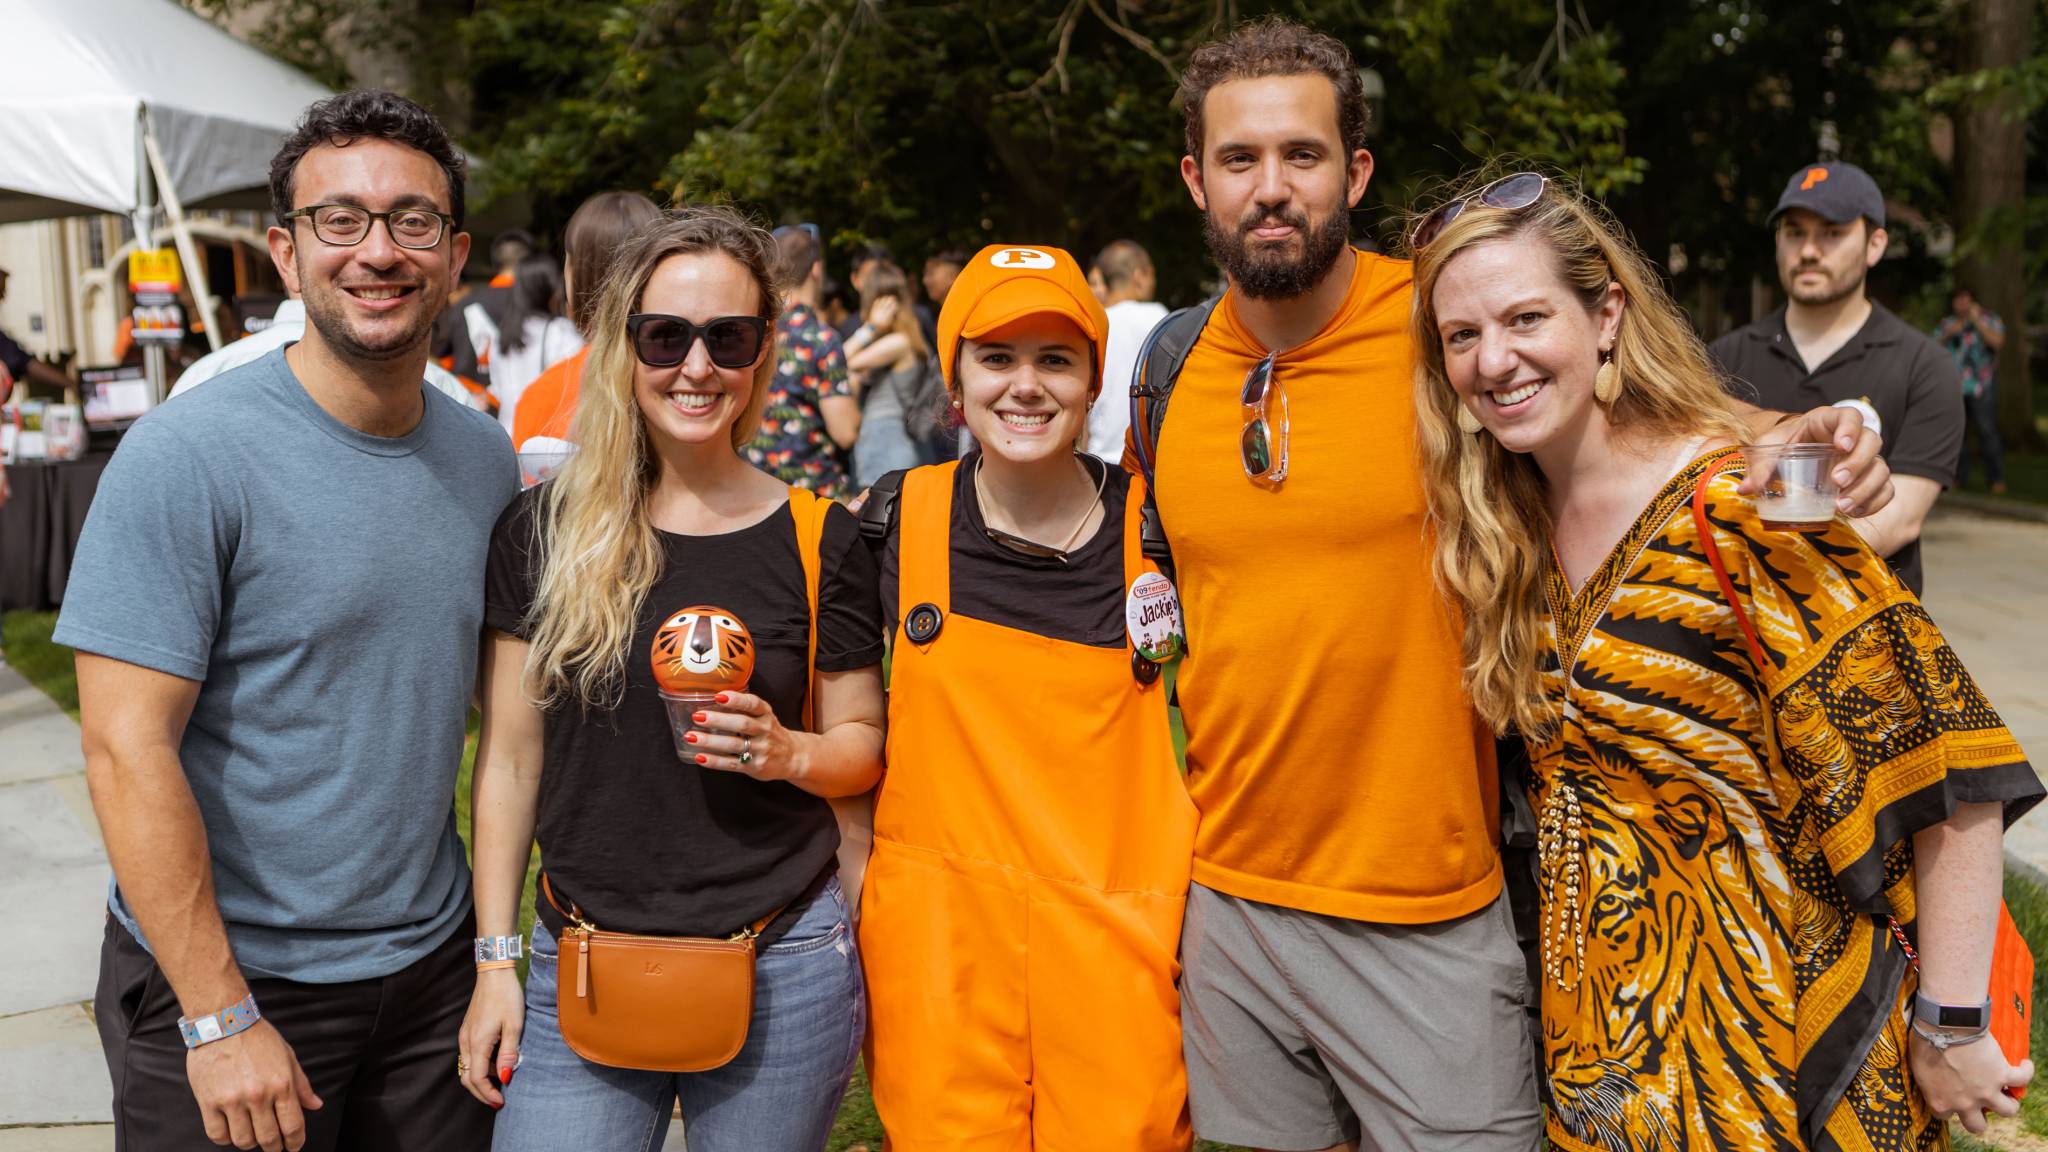 We are family Princeton alumni connect across the generations at Reunions